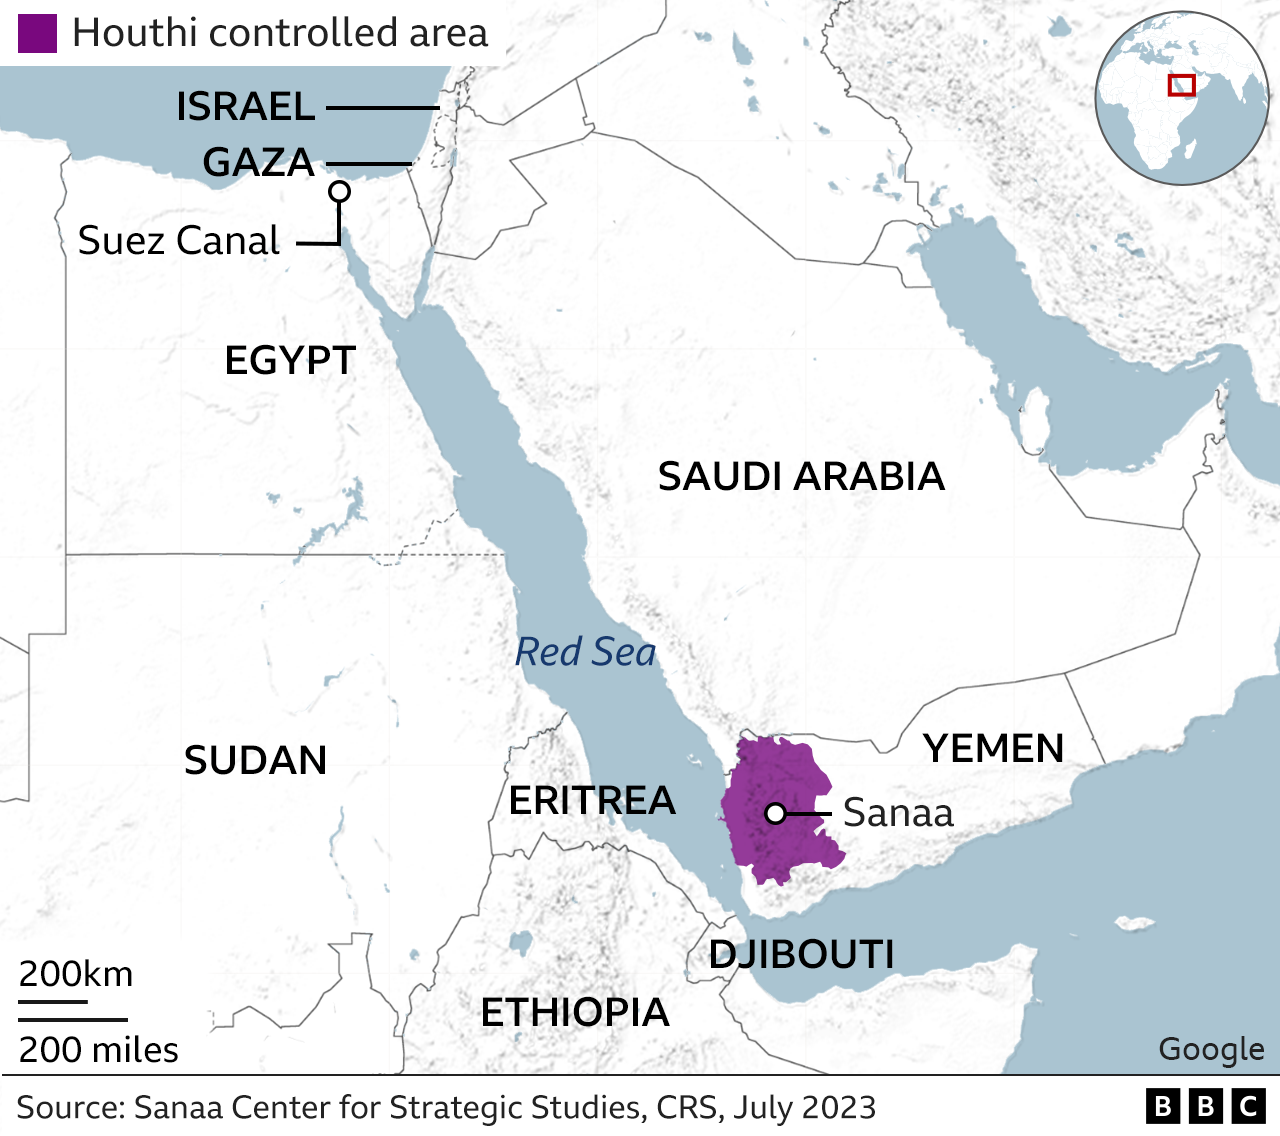 BBC map shows Yemen - including its western parts under Houthi control - and the wider Middle East, including the Red Sea, Israel and Gaza